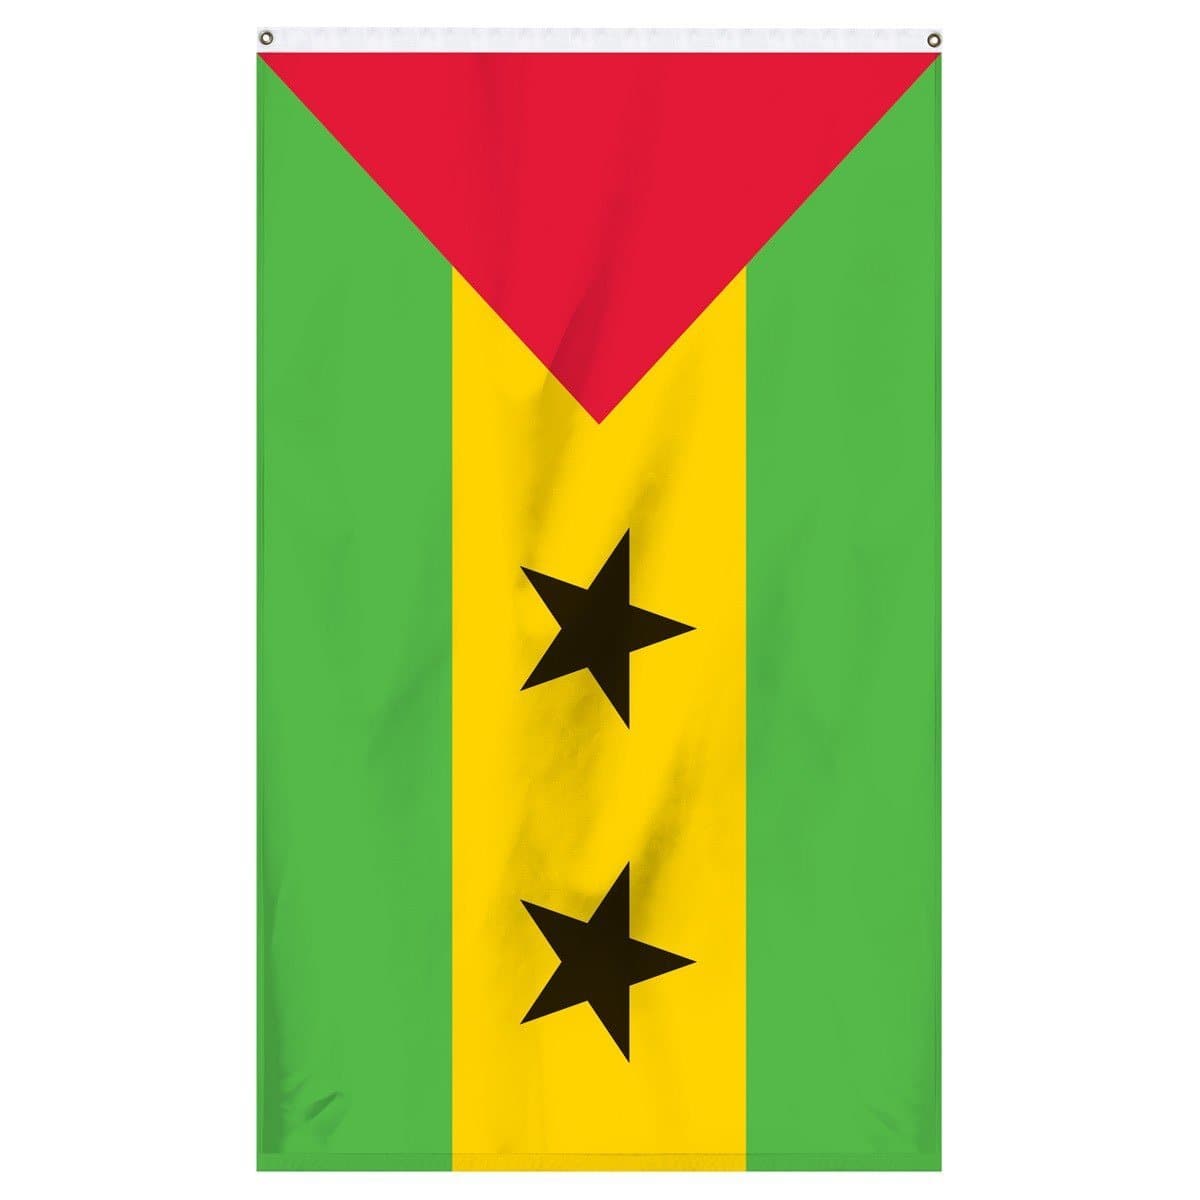 Sao Tome and Principe national flag for sale to buy online now from an American company